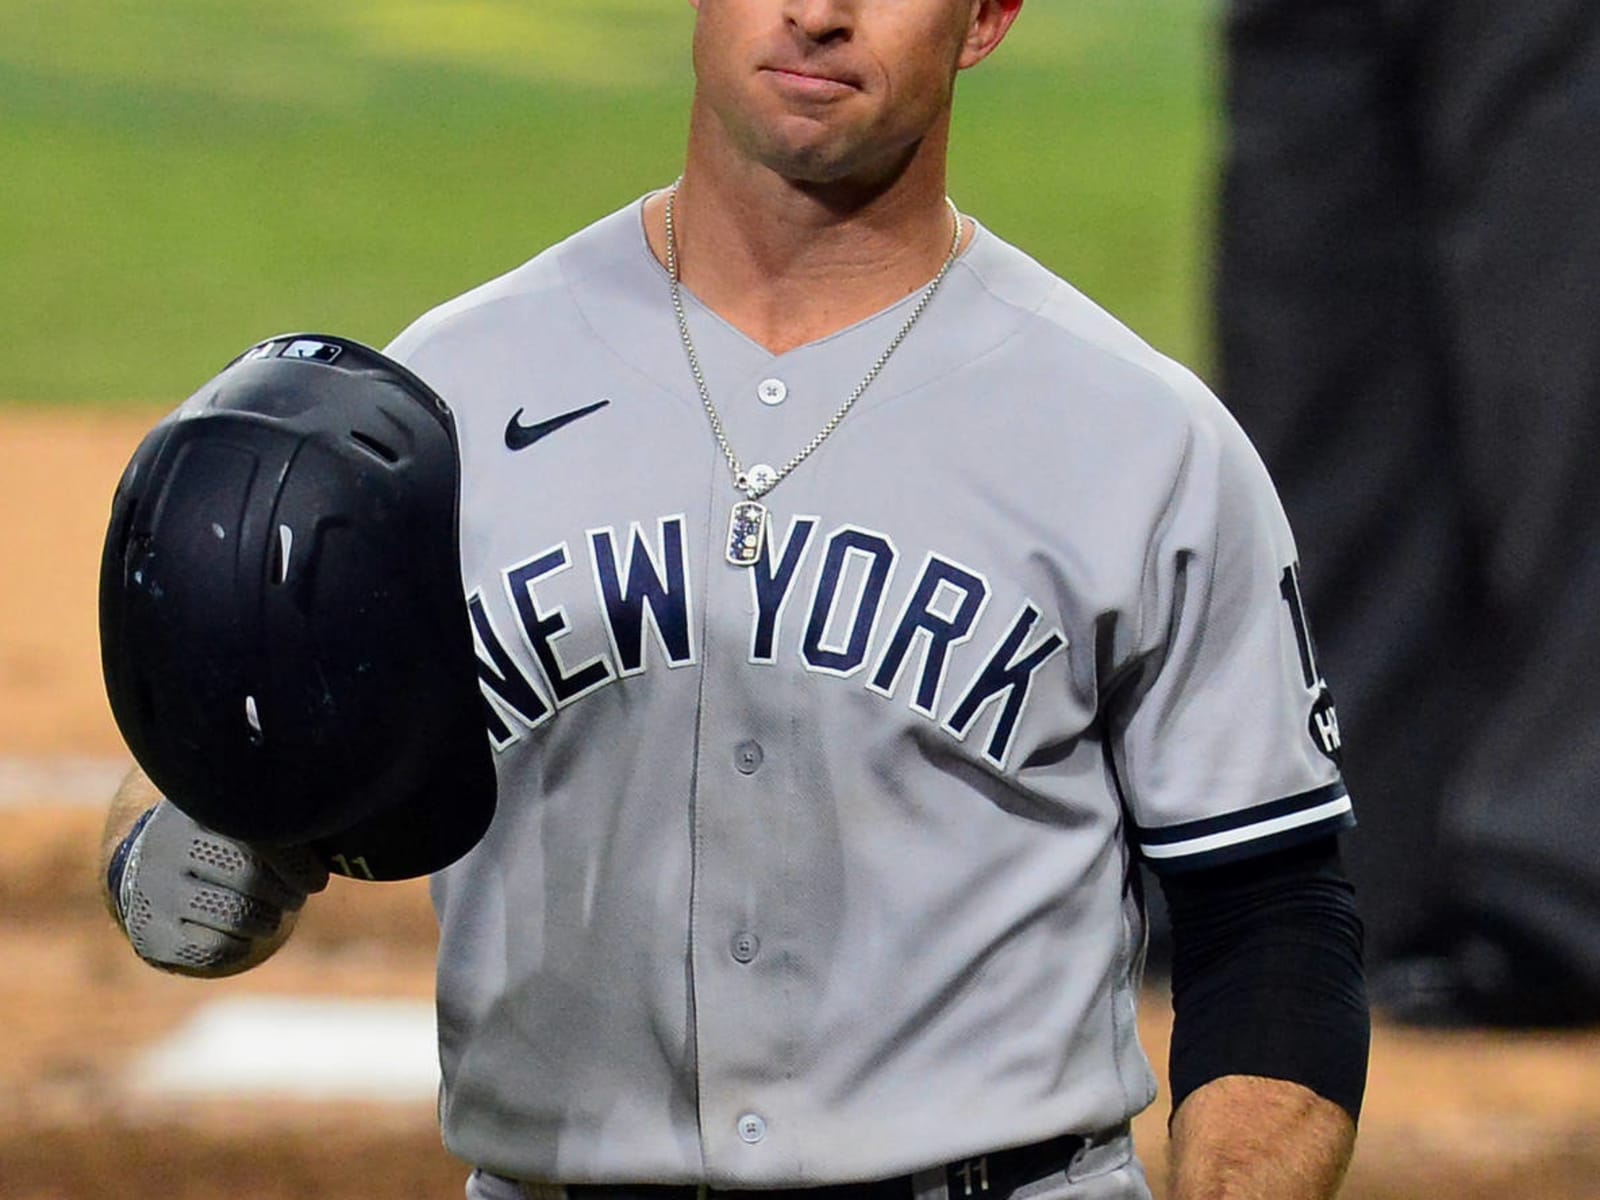 Brett Gardner doesn't want Yankees tenure to end like this